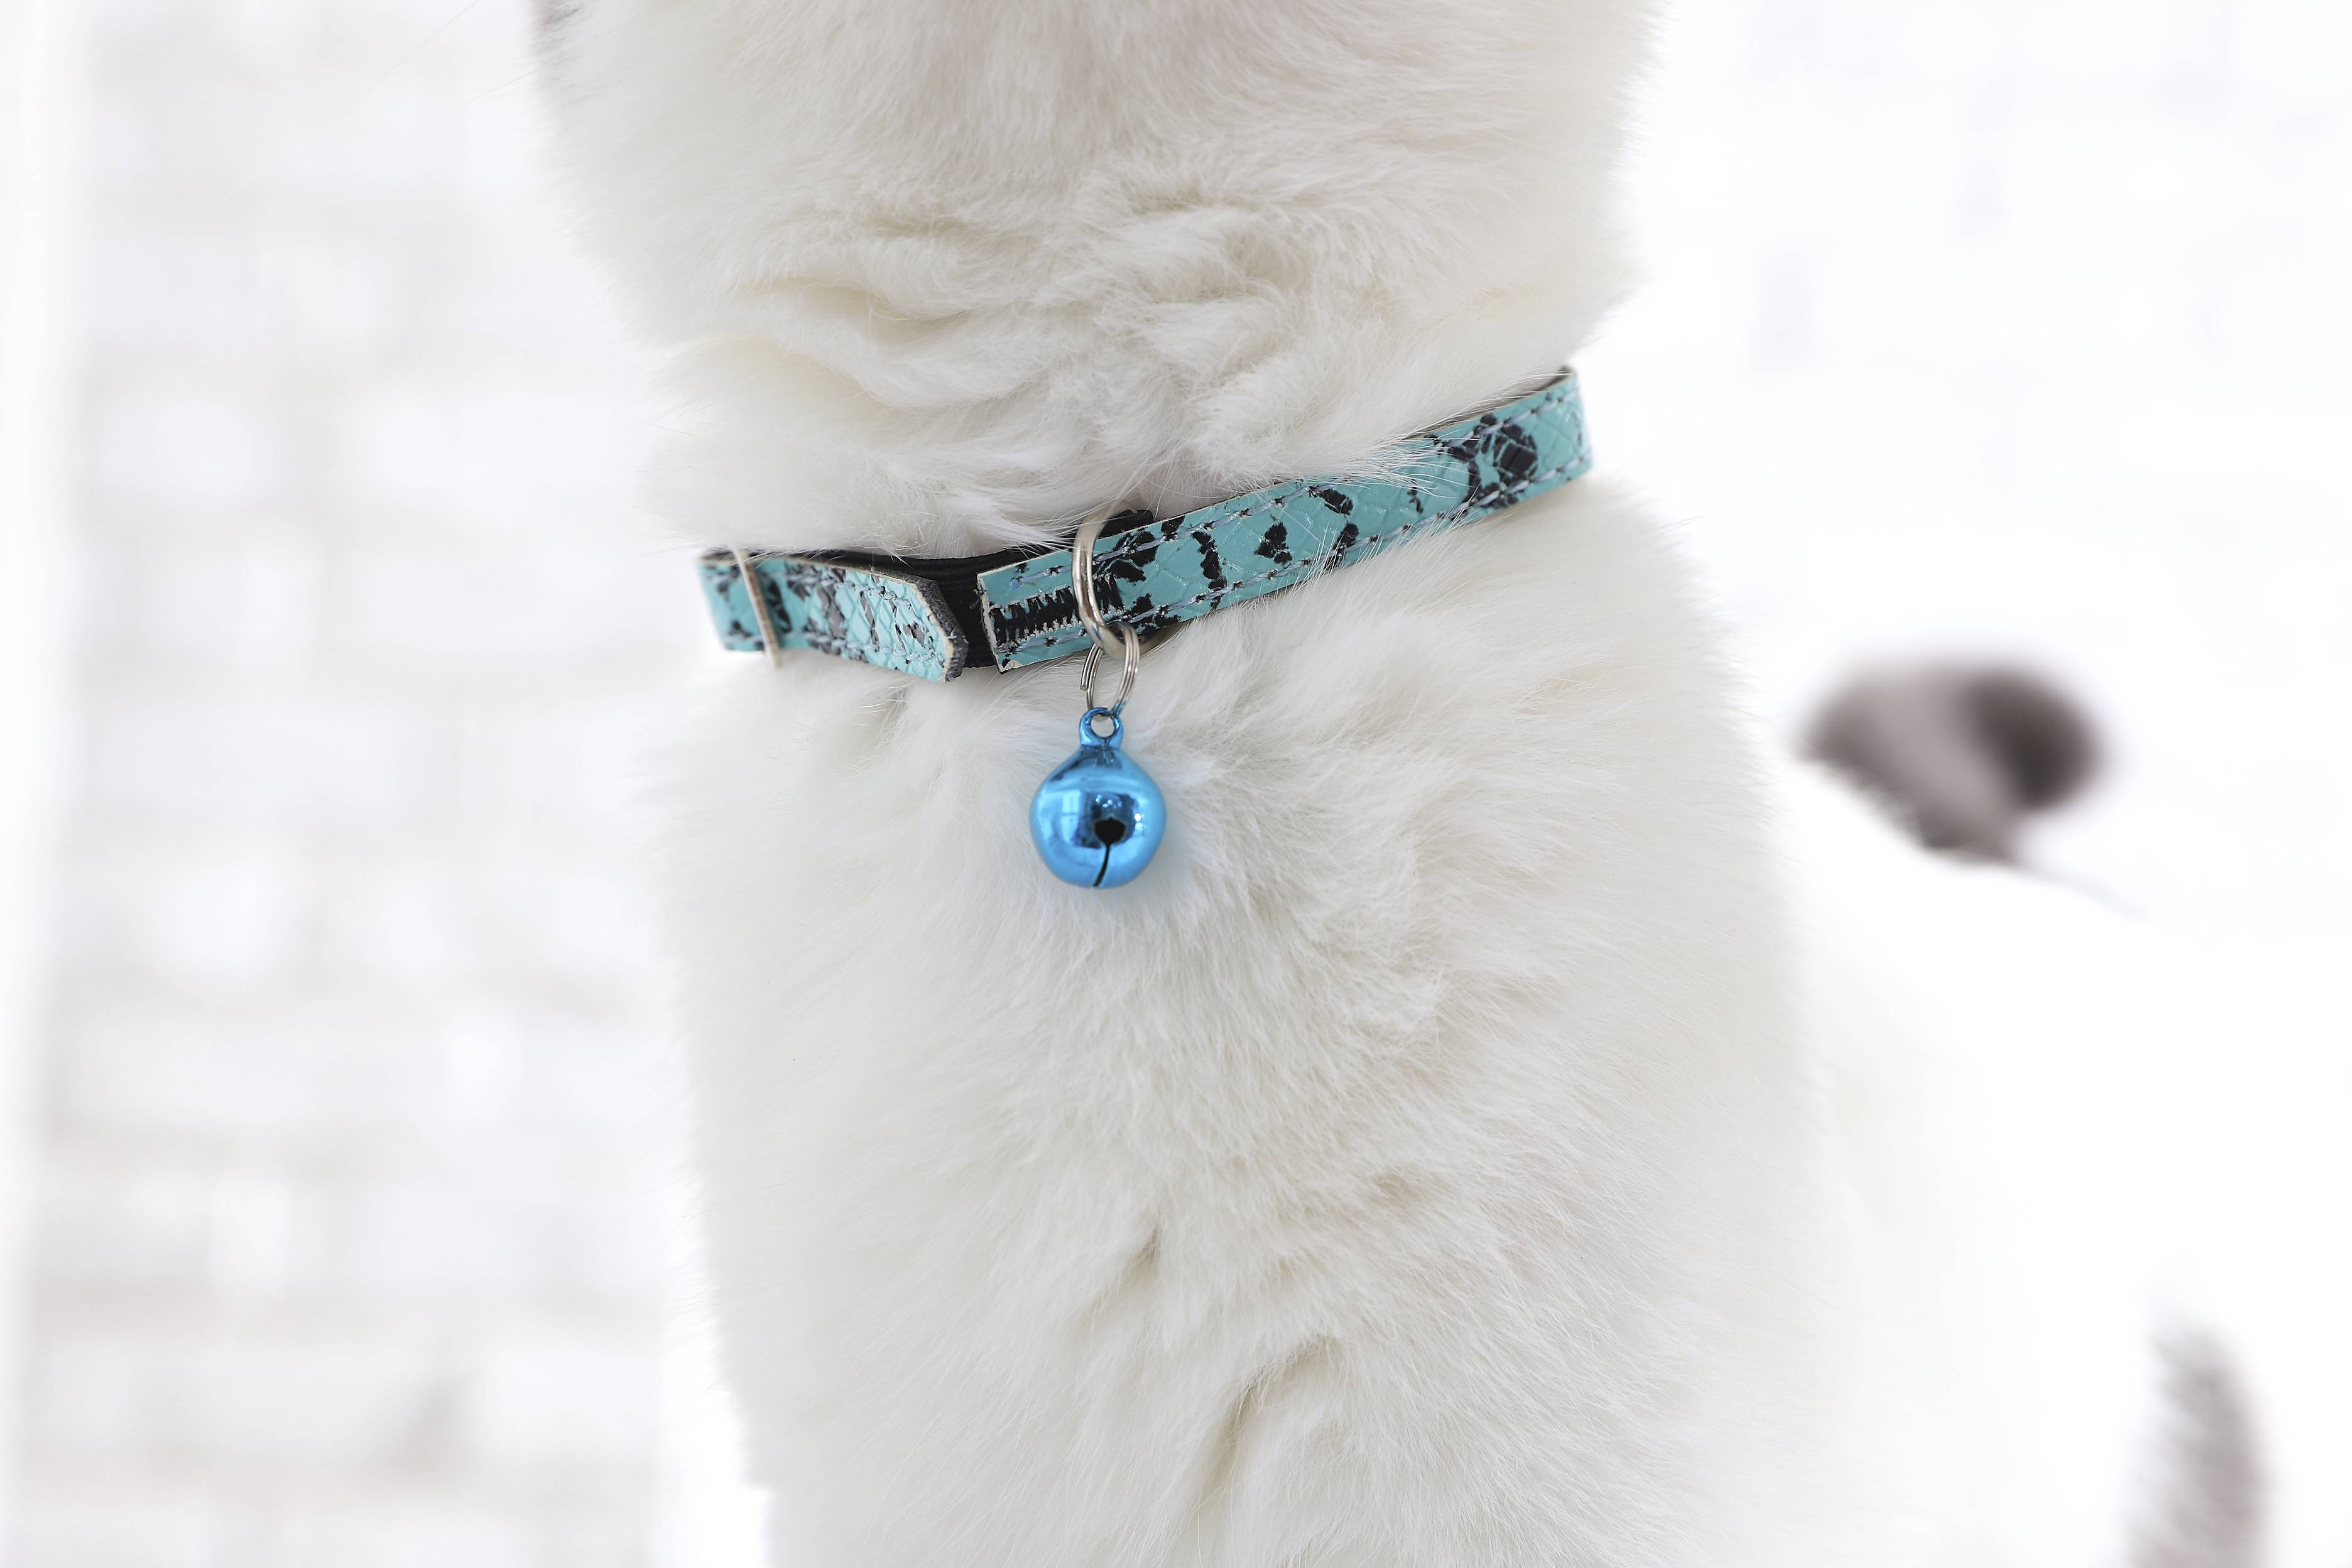 Breakaway Safety Durable Comfortable Soft PU Leather Cat Collar With Bell